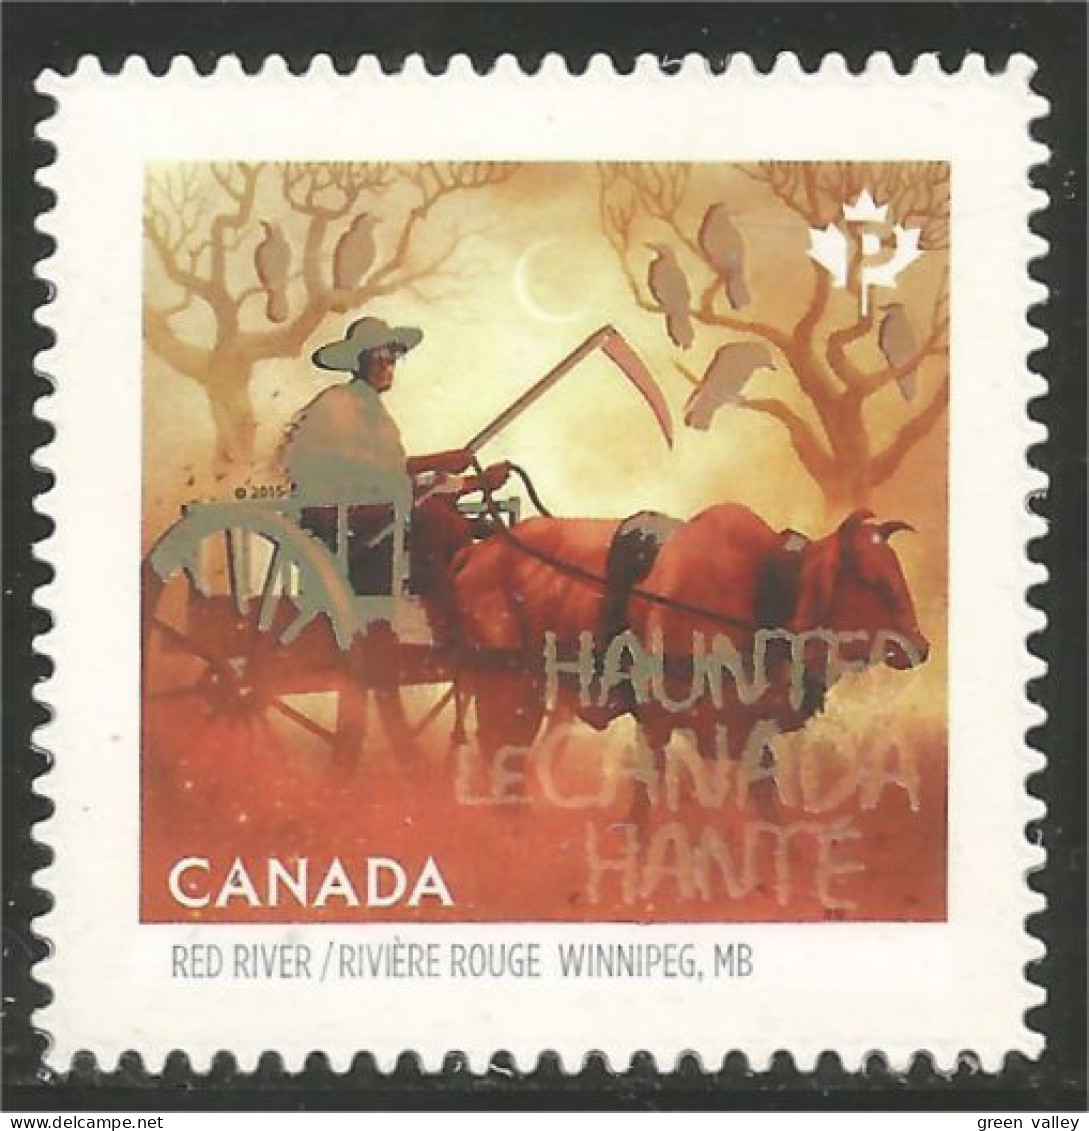 Canada Trail Oxcart Chariot Boeuf Annual Collection Annuelle MNH ** Neuf SC (C28-64ia) - Nuovi